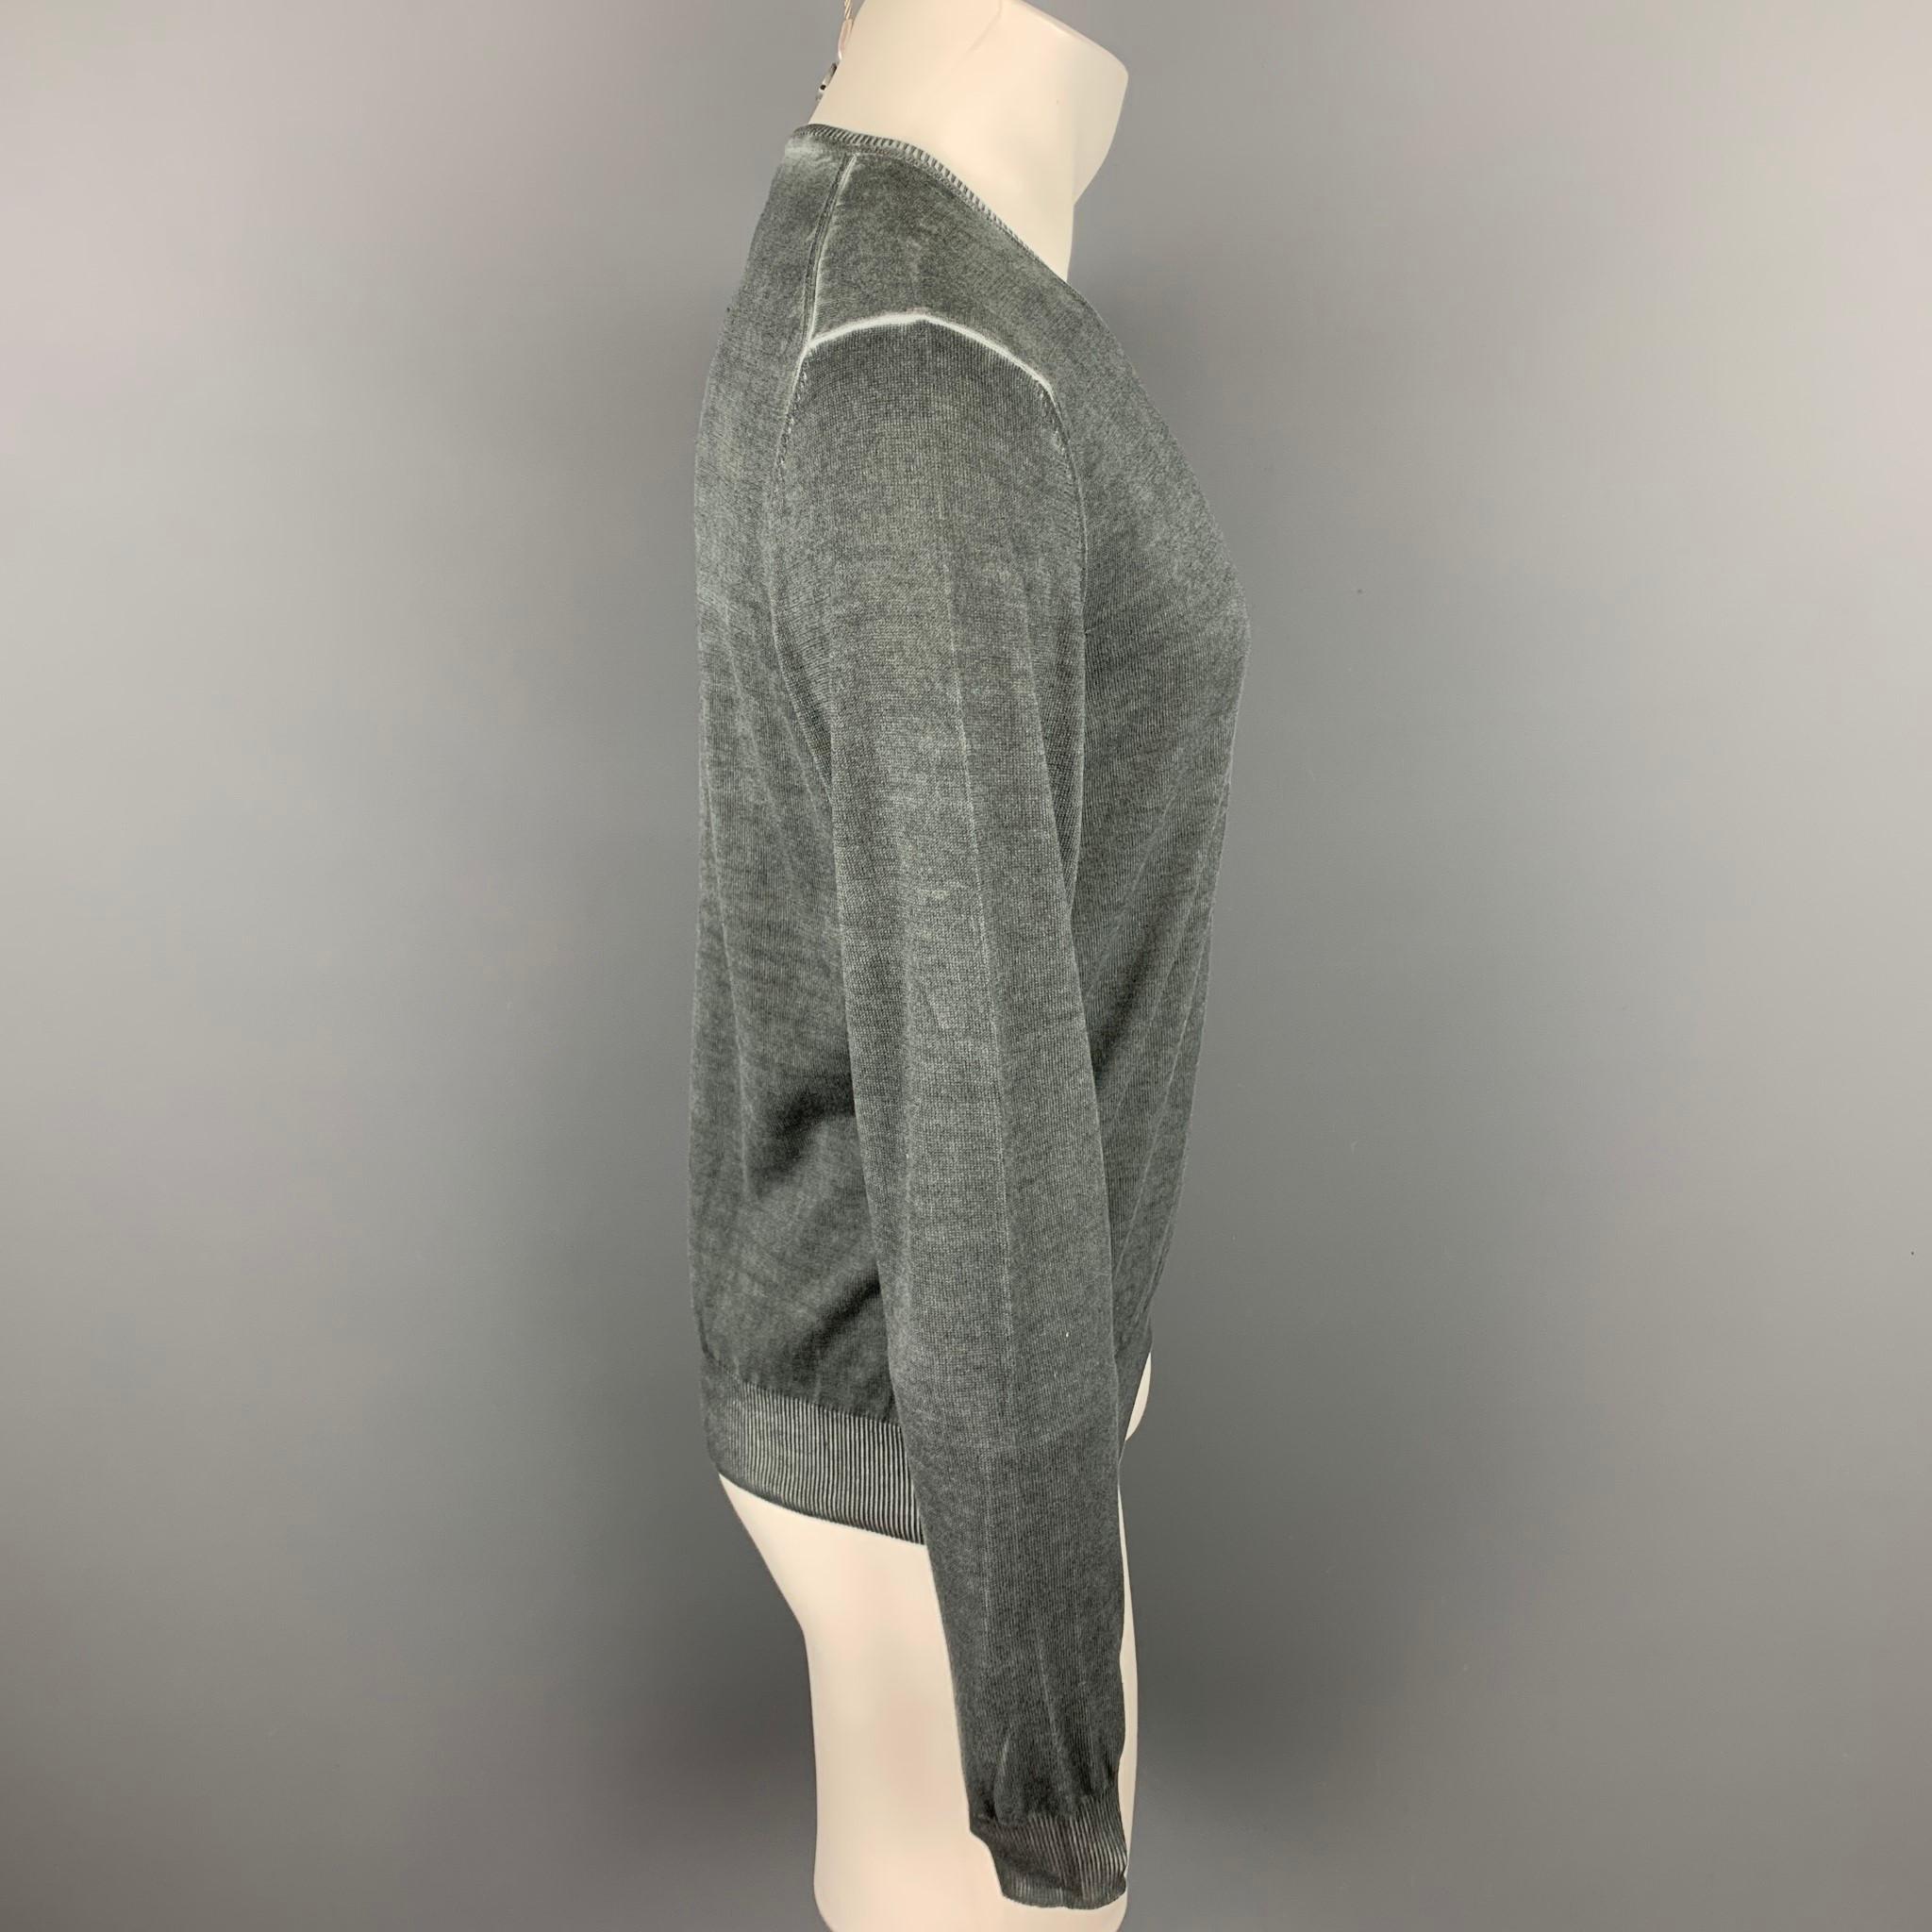 PLOUMANACH pullover comes in a slate dyed cotton featuring a ribbed hem and a v-neck.

Very Good Pre-Owned Condition.
Marked: 50

Measurements:

Shoulder: 18 in.
Chest: 40 in.
Sleeve: 28 in.
Length: 24.5 in. 